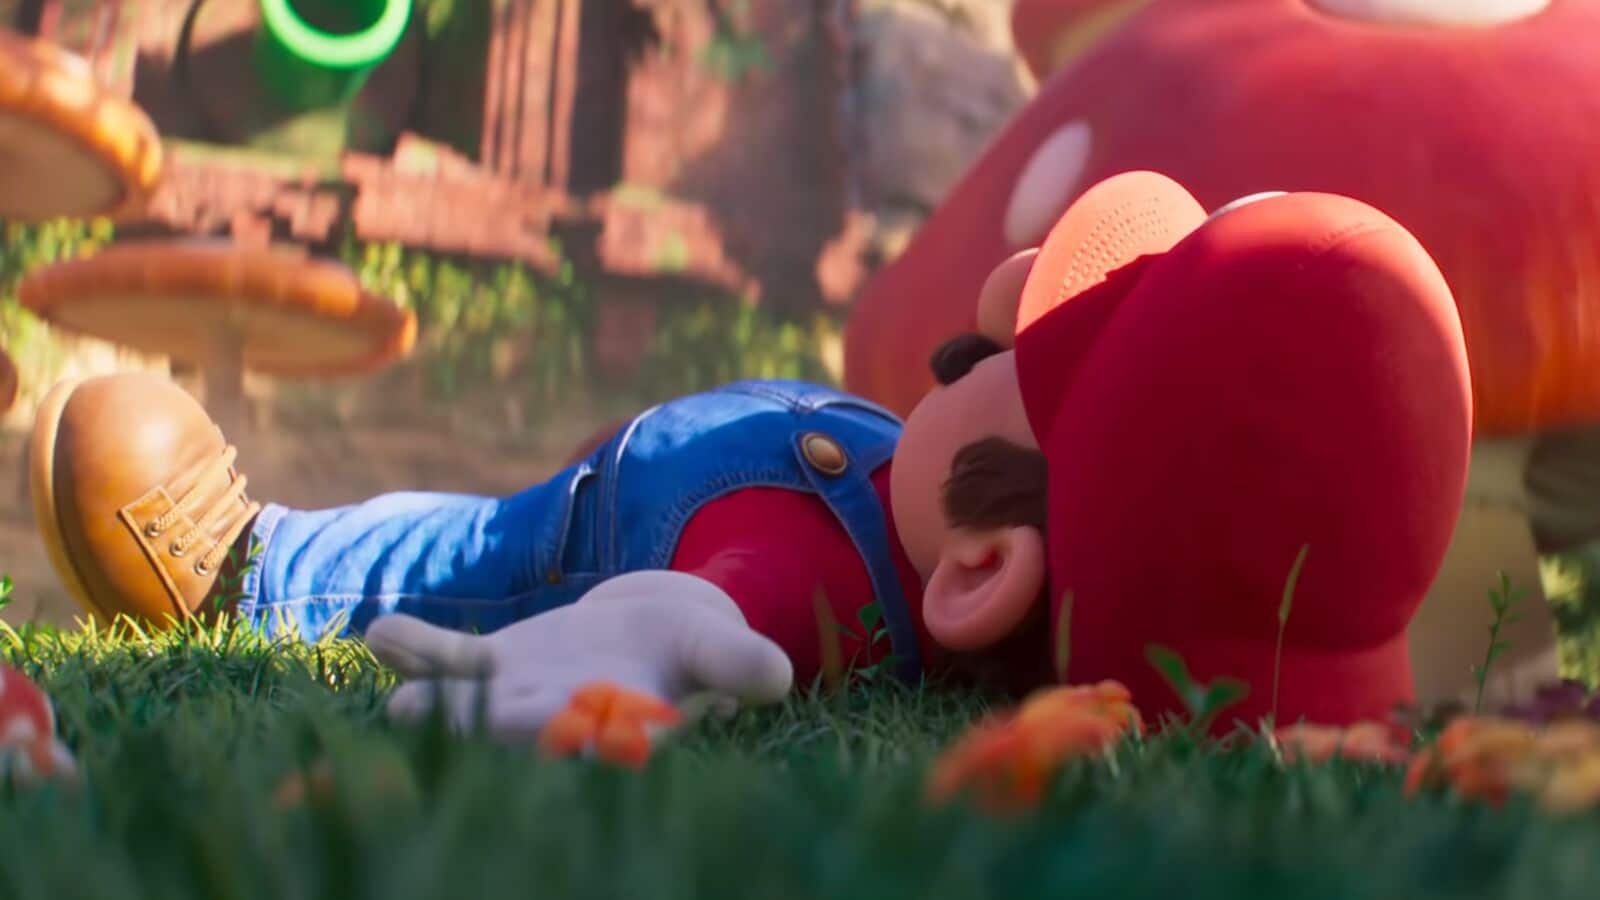 Chris Pratt's voice is removed for a reimagined voice of the original Mario in the Super Mario Bros. movie and the community accepts it